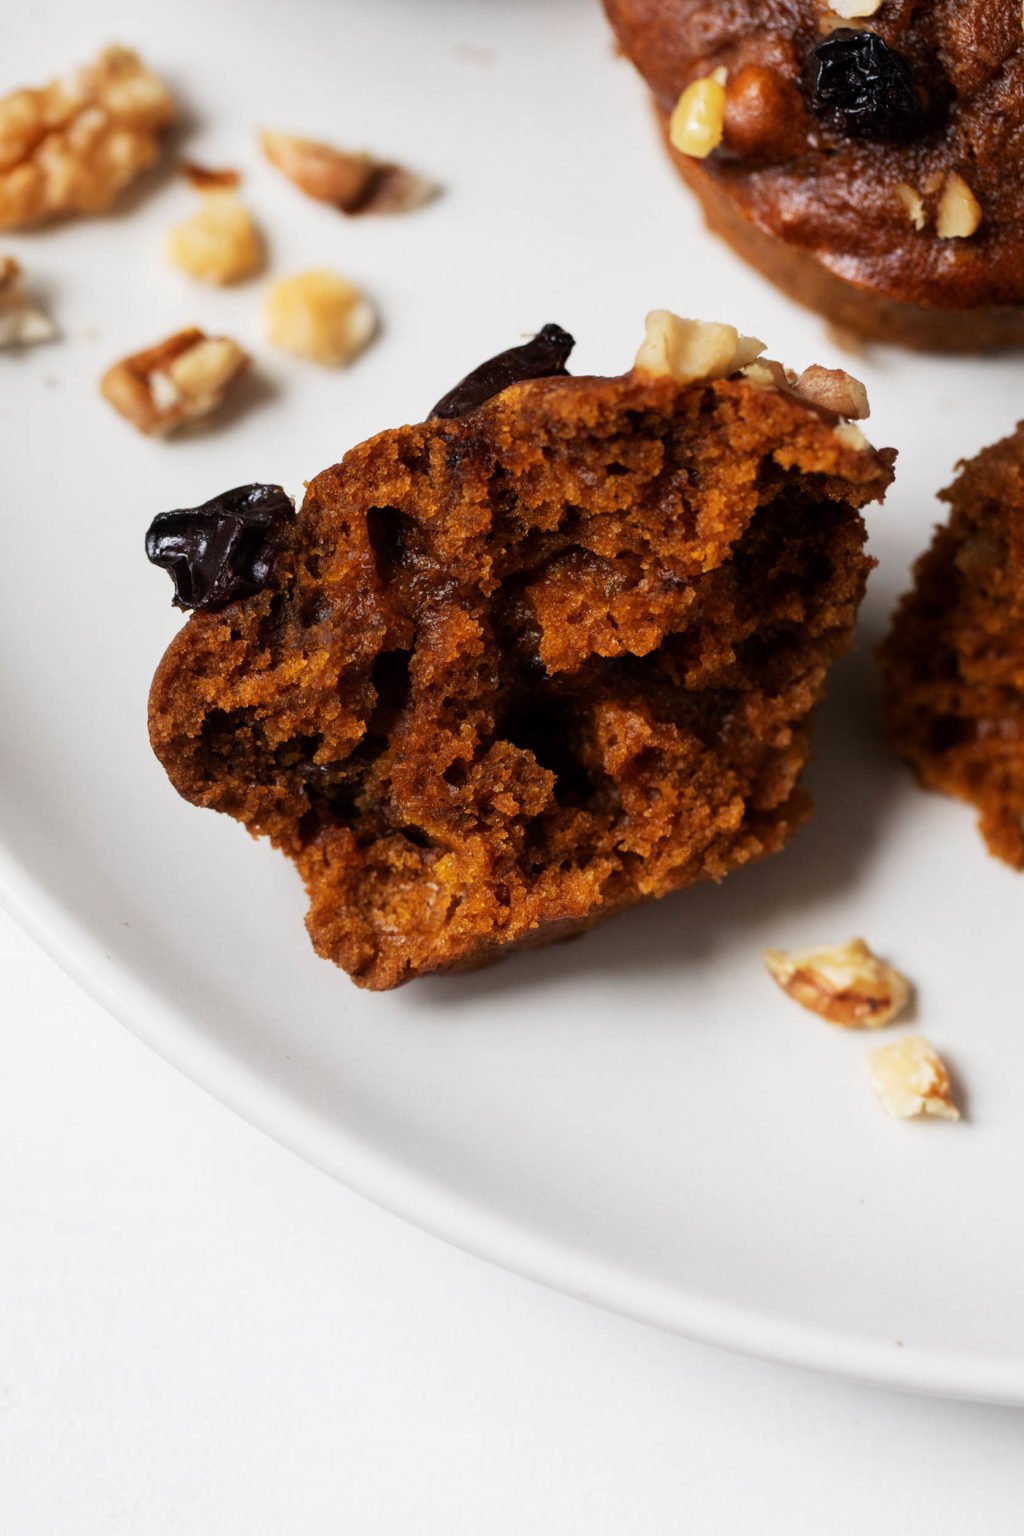 Half of a vegan pumpkin muffin with gingerbread spices, resting on a place with chopped walnut pieces.